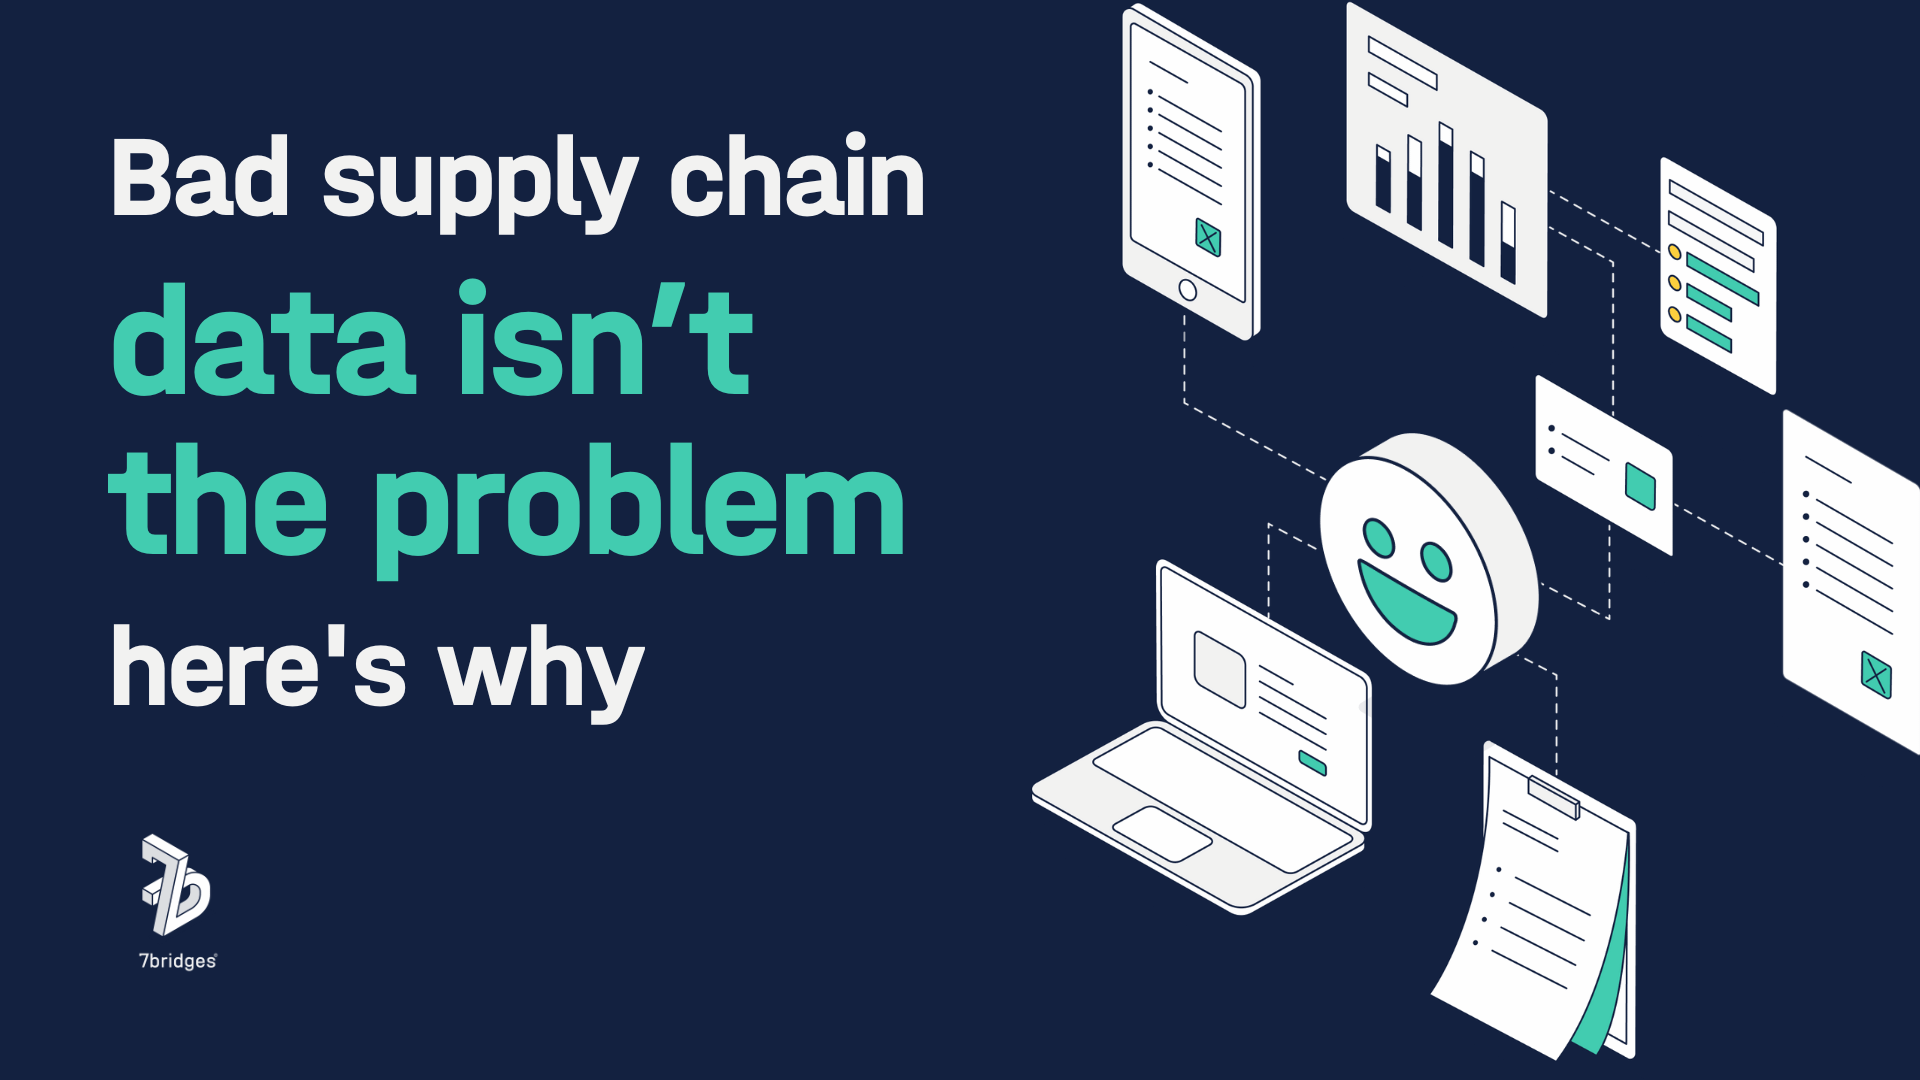 Bad supply chain data isn’t the problem - here’s why